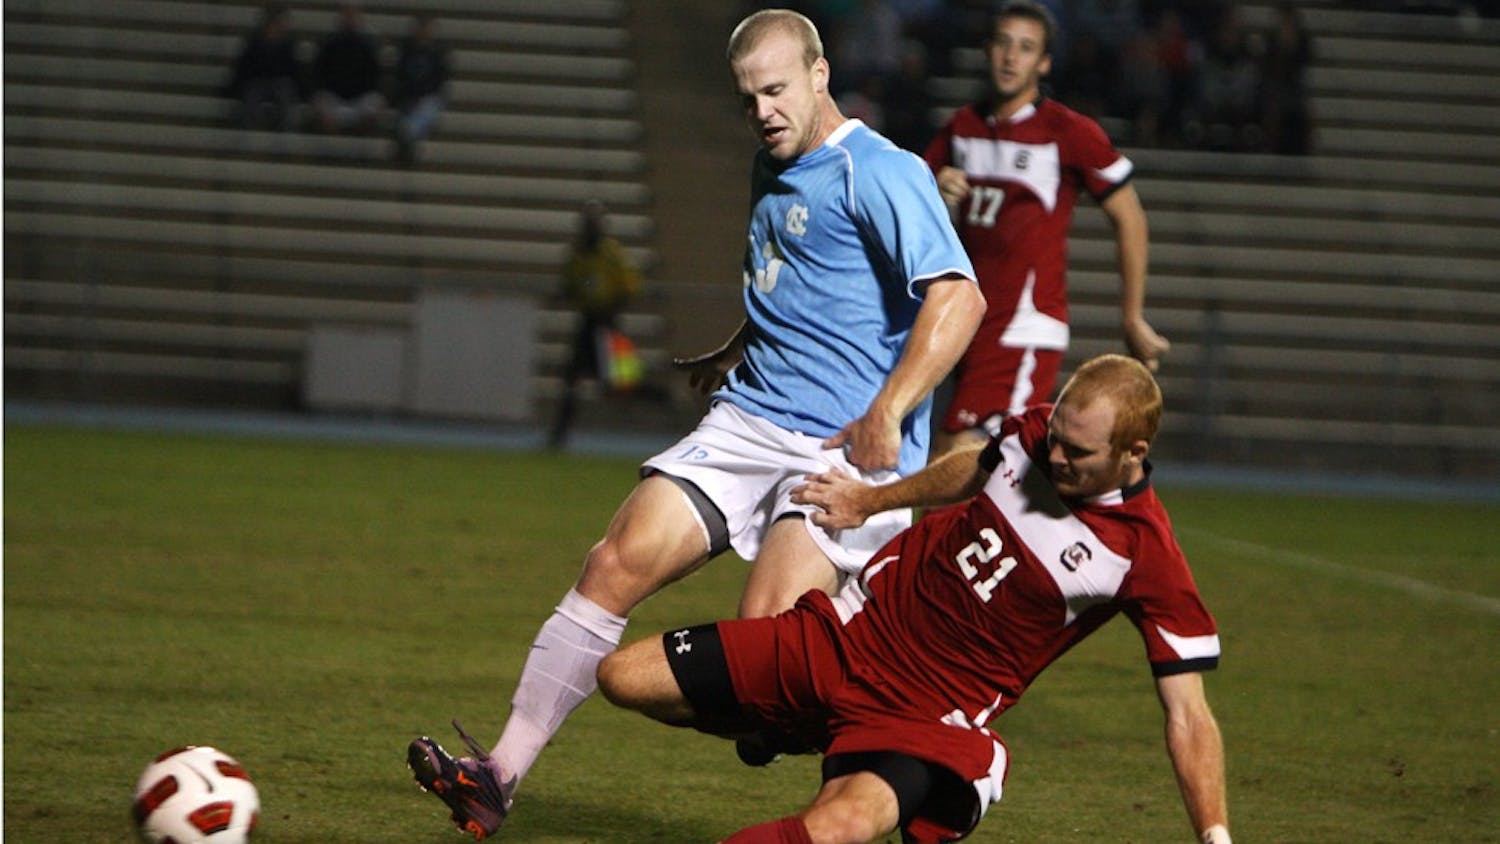 Redshirt freshman Josh Rice is taken down by South Carolina defender Danny Cates. The match featured seven yellow cards, four by South Carolina, and two red cards that were split between the two squads.